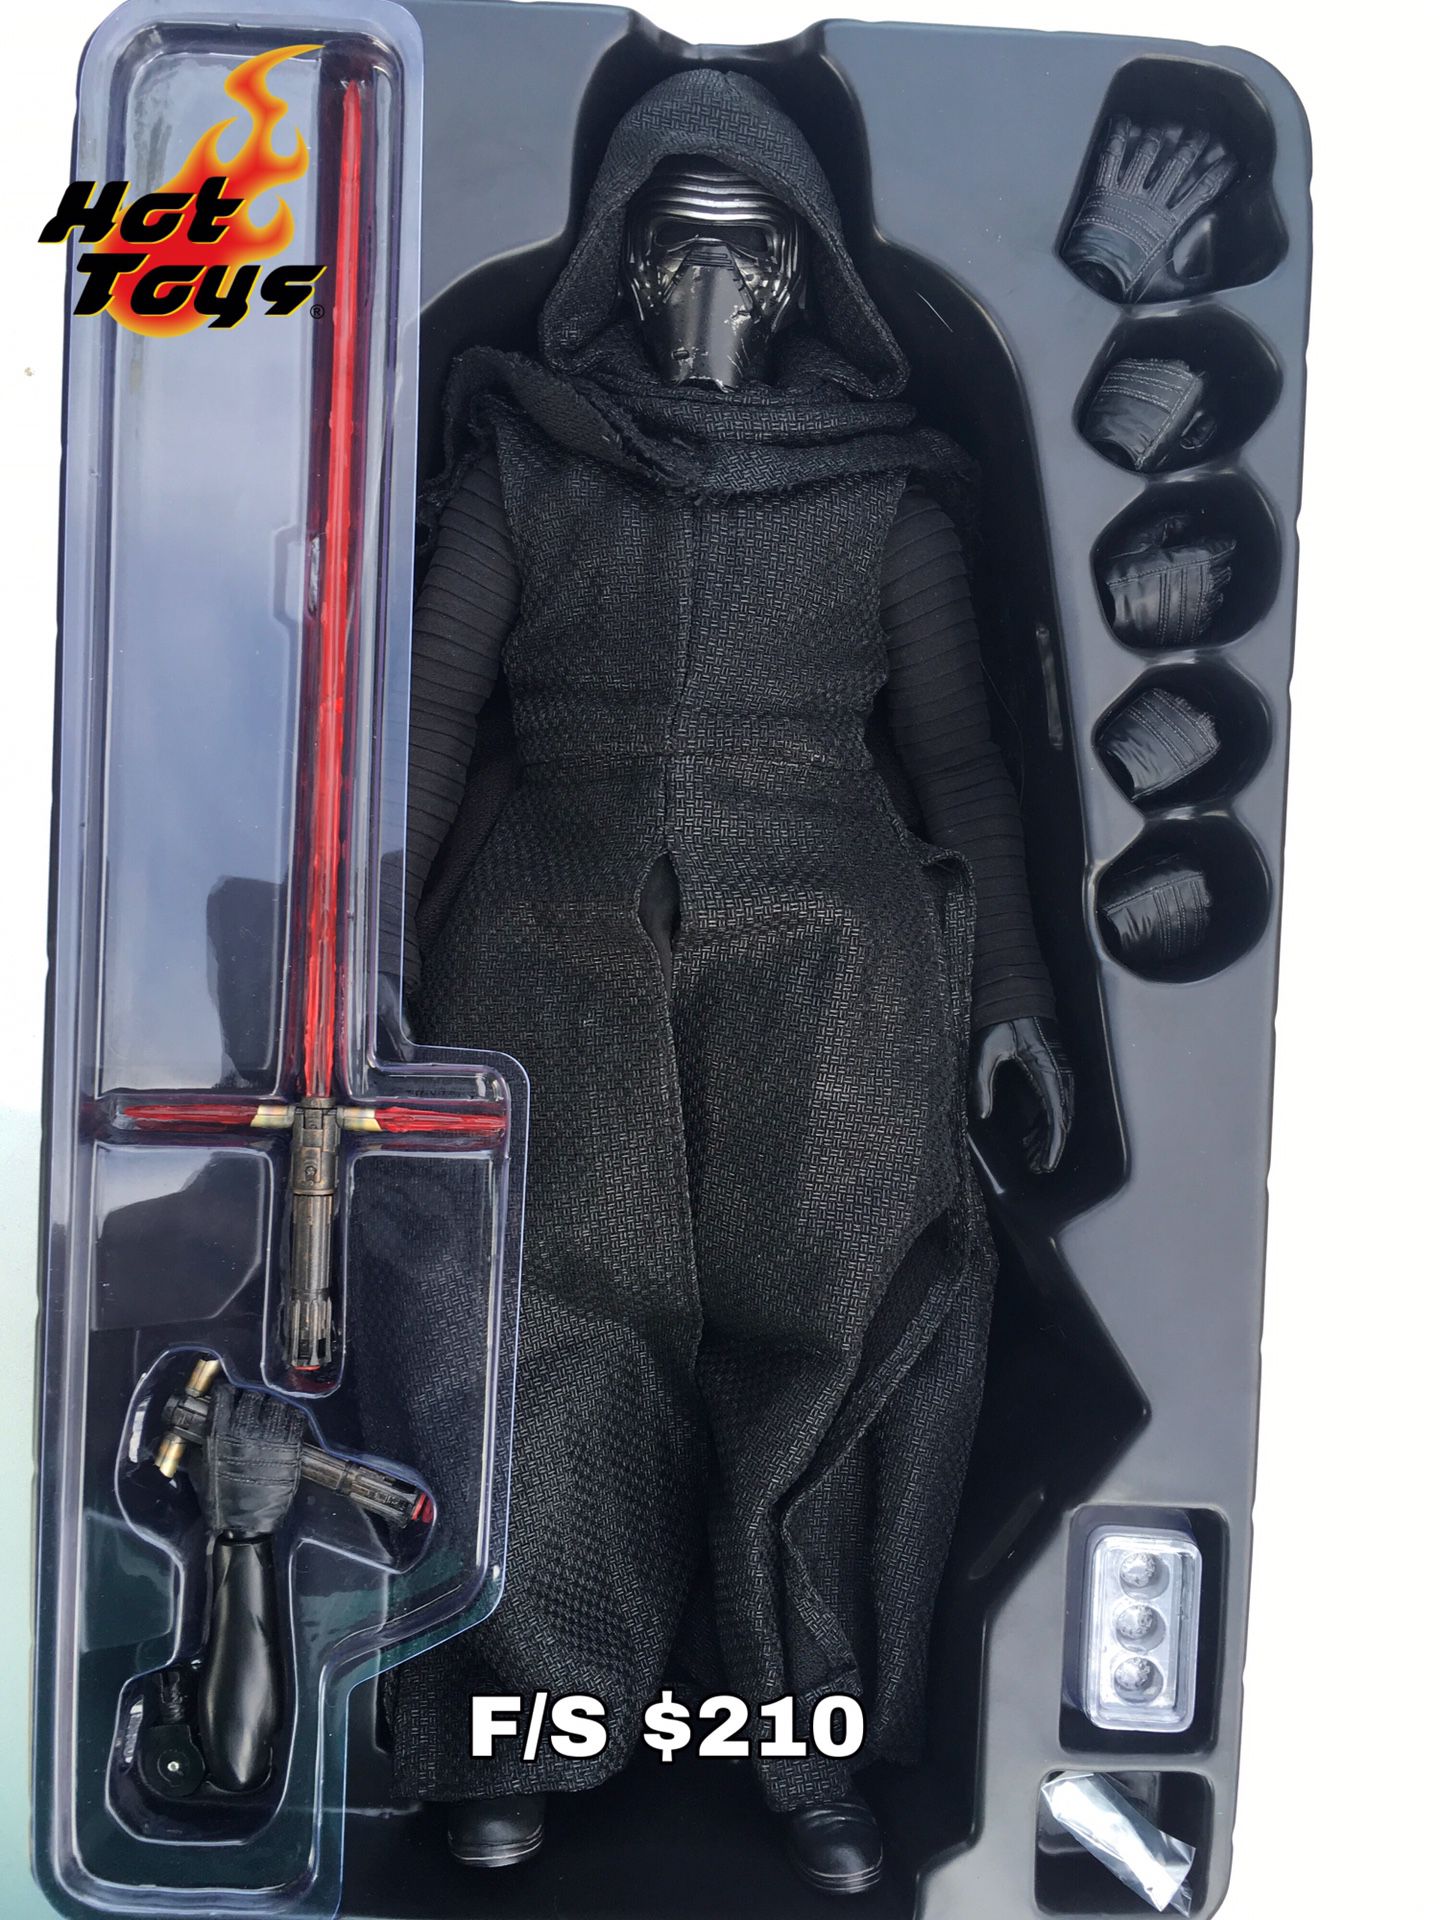 Hot Toys 1/6 Scale (MMS 320) Kylo Ren Action Figure from Star Wars